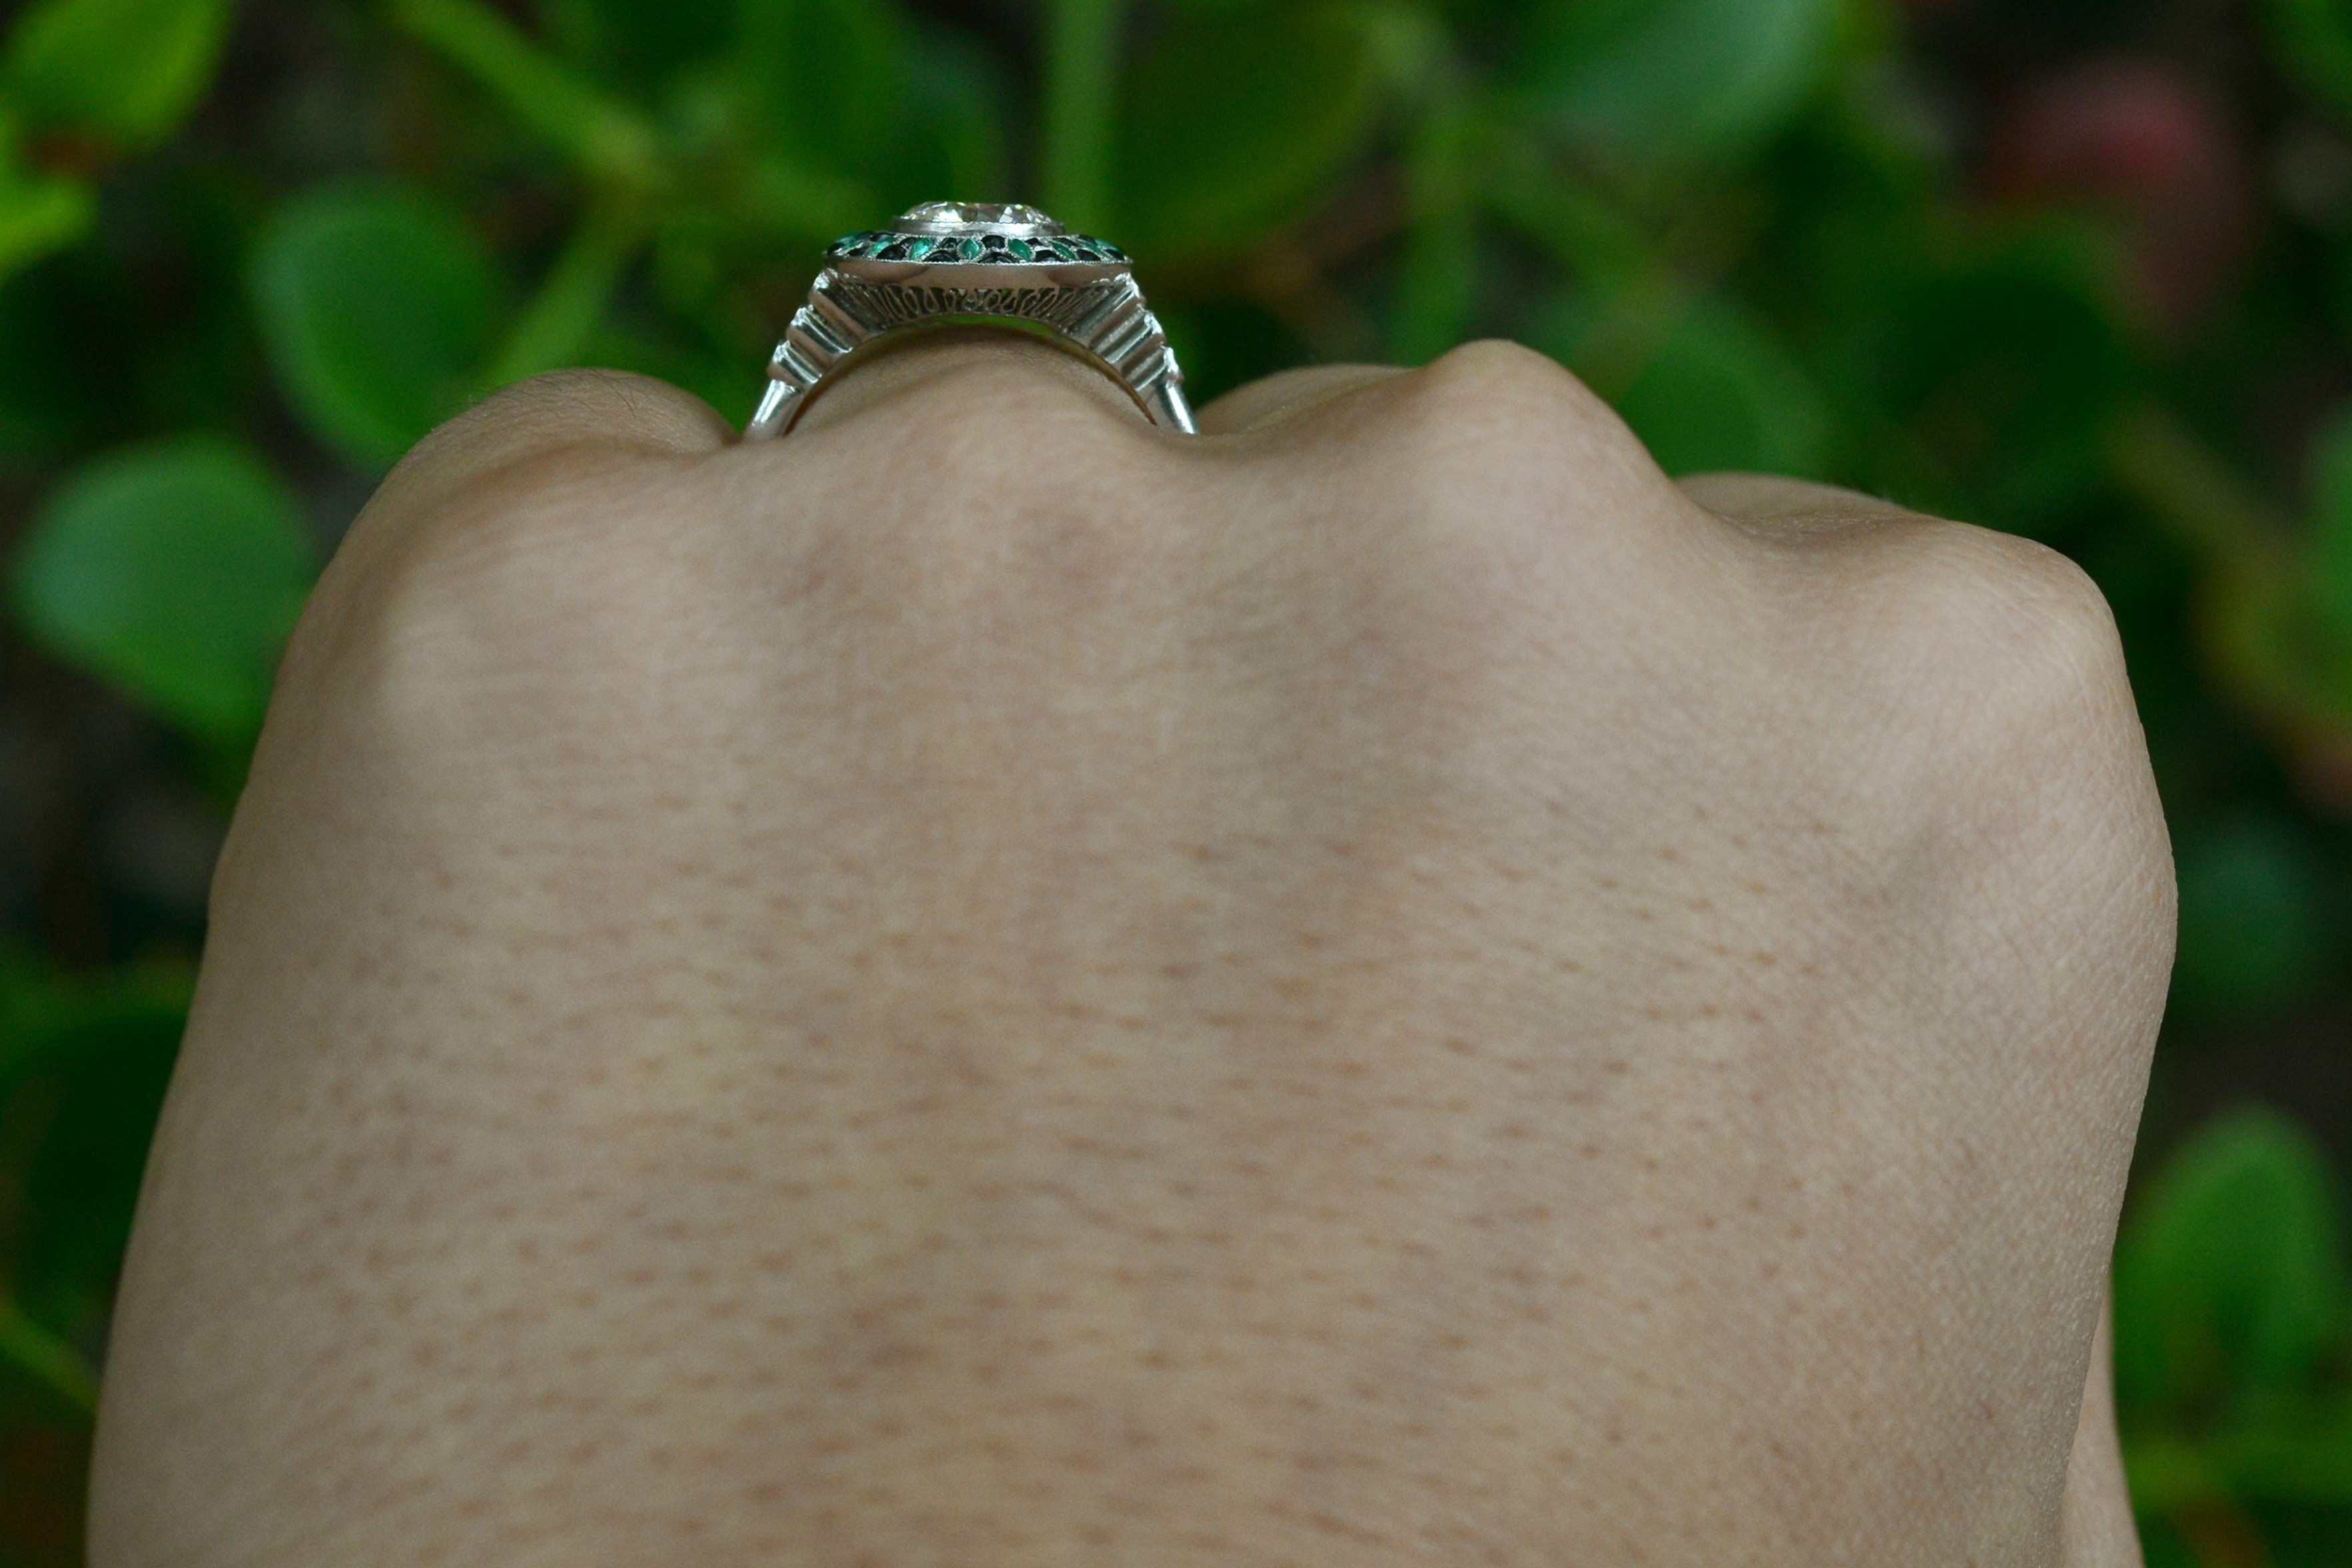 diamond and emerald engagement ring